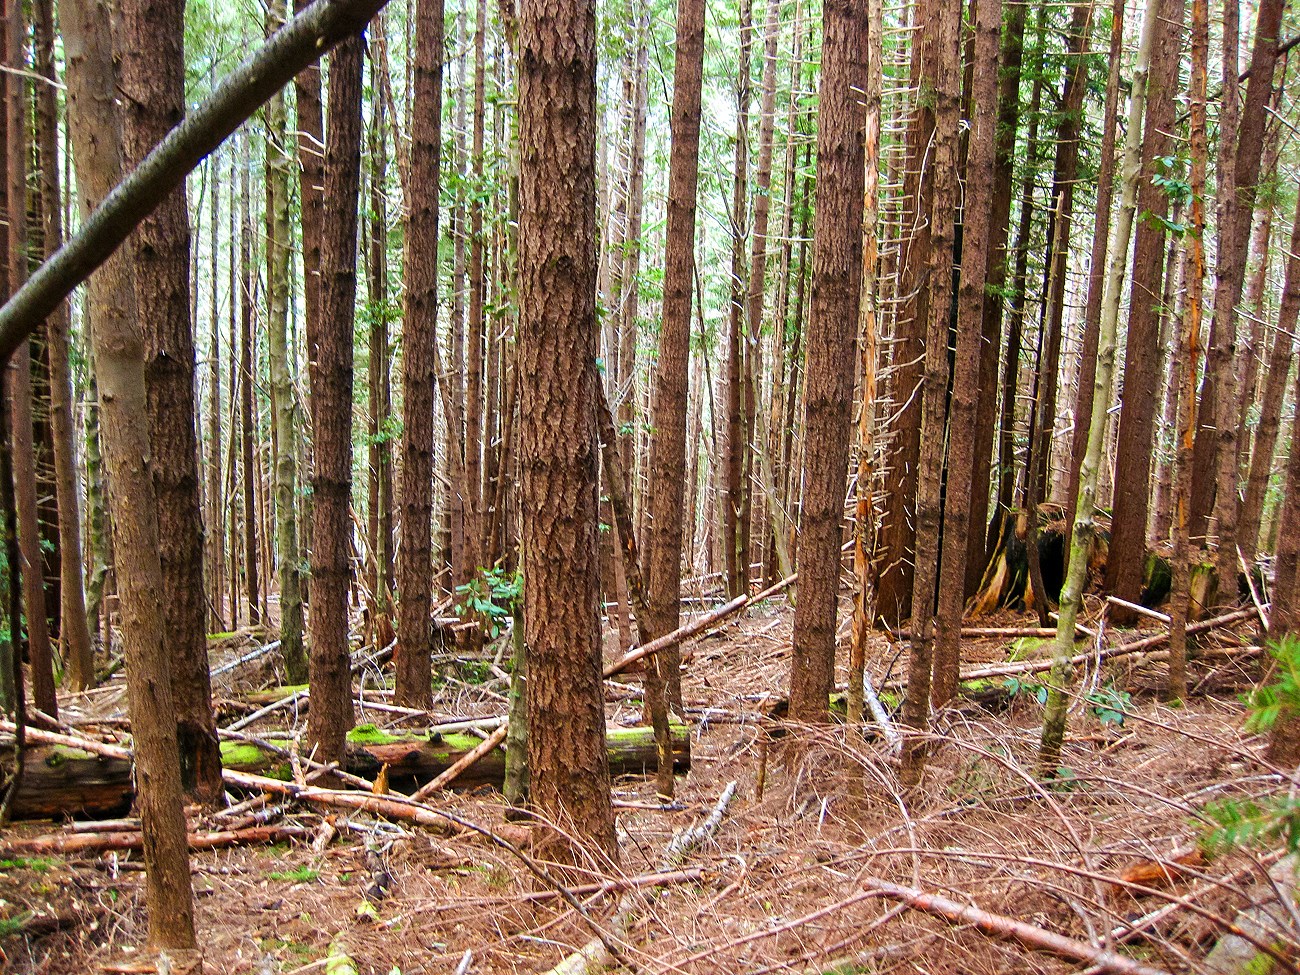 Forest with densely packed trees, none of which are especially large. The tree trunks are all perfectly vertical, with virtually no lower branches to speak of. The forest floor is thick with fallen, flammable  debris.